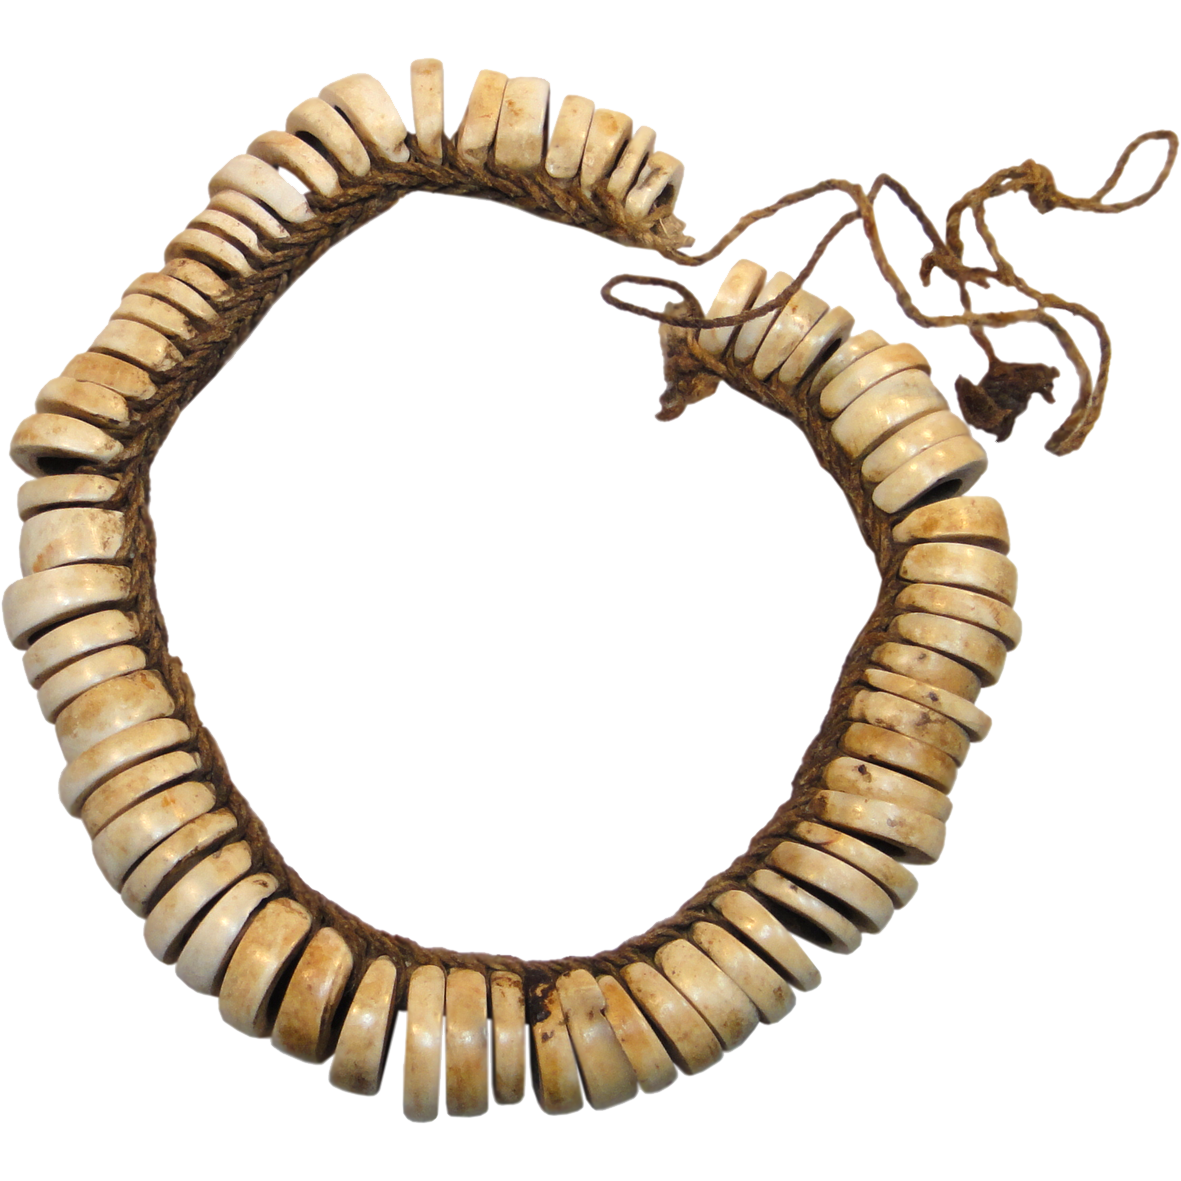 Papua New Guinea, Milne Bay Province, Necklace from Conus Shell Beads (obverse)